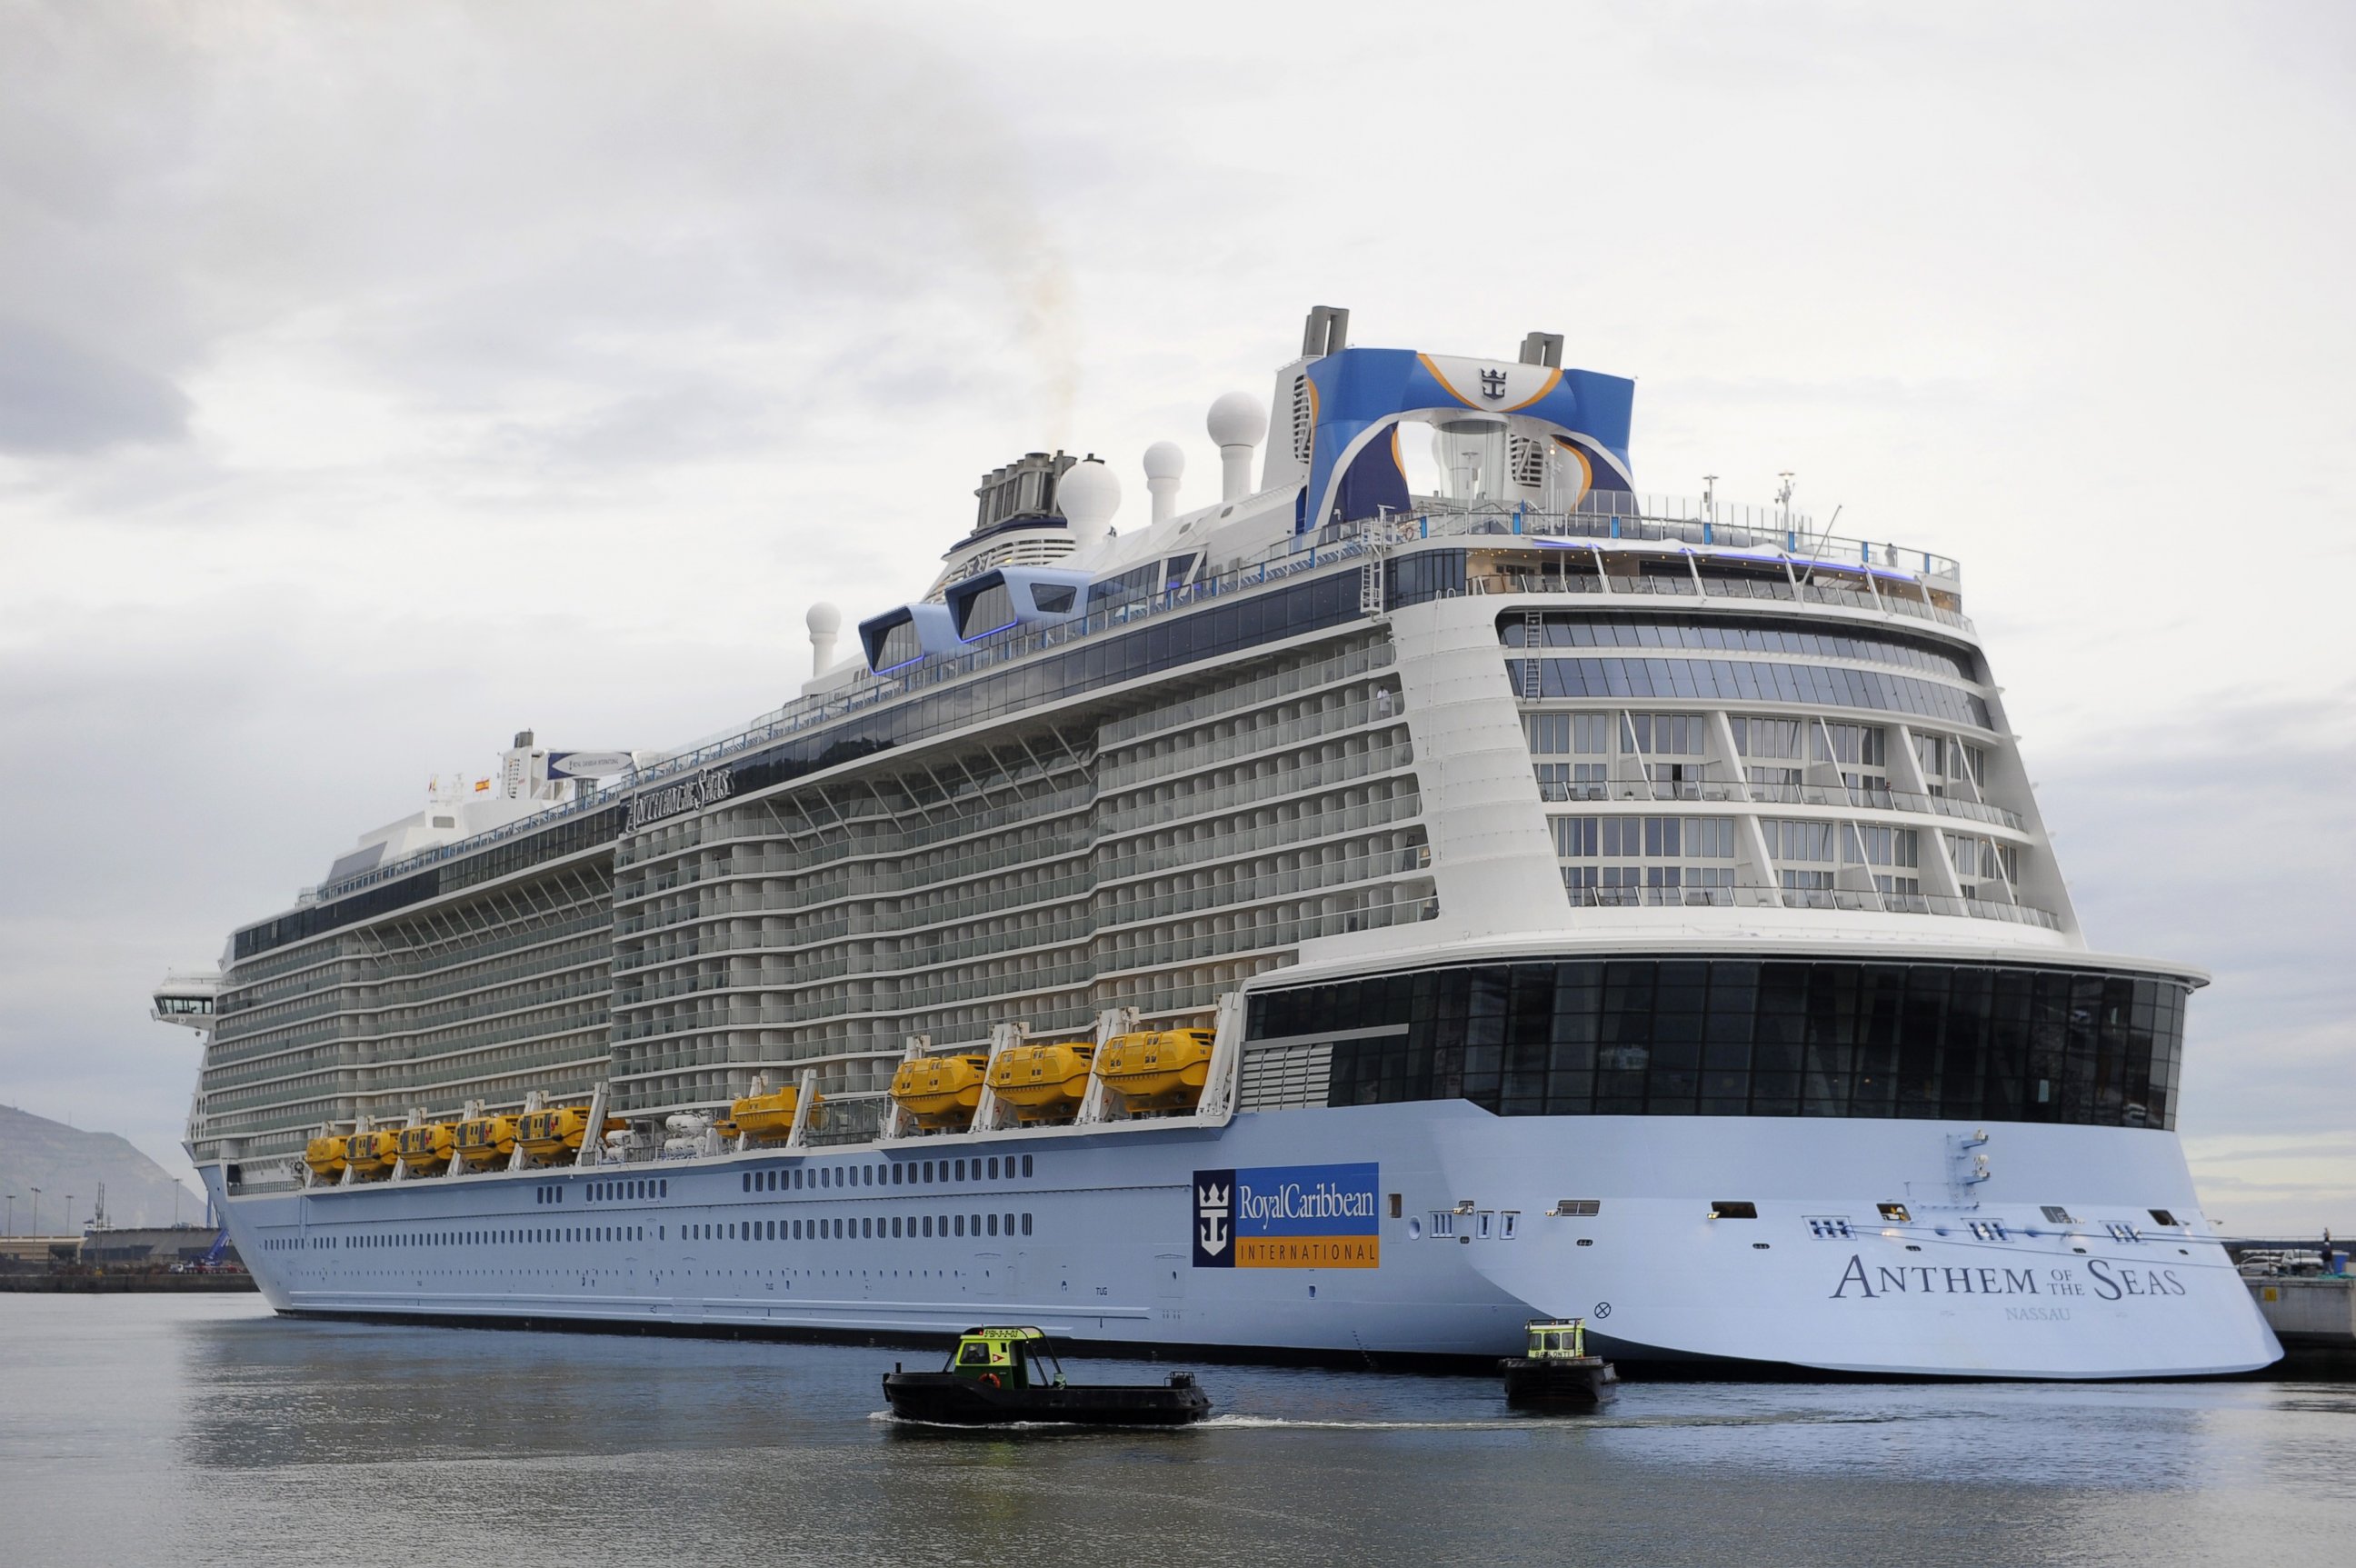 PHOTO: The Royal Caribbean's cruise liner 'Anthem Of The Seas', the third largest ship in the world, is moored at the port of Bilbao during its maiden voyage, on April 26, 2015. 